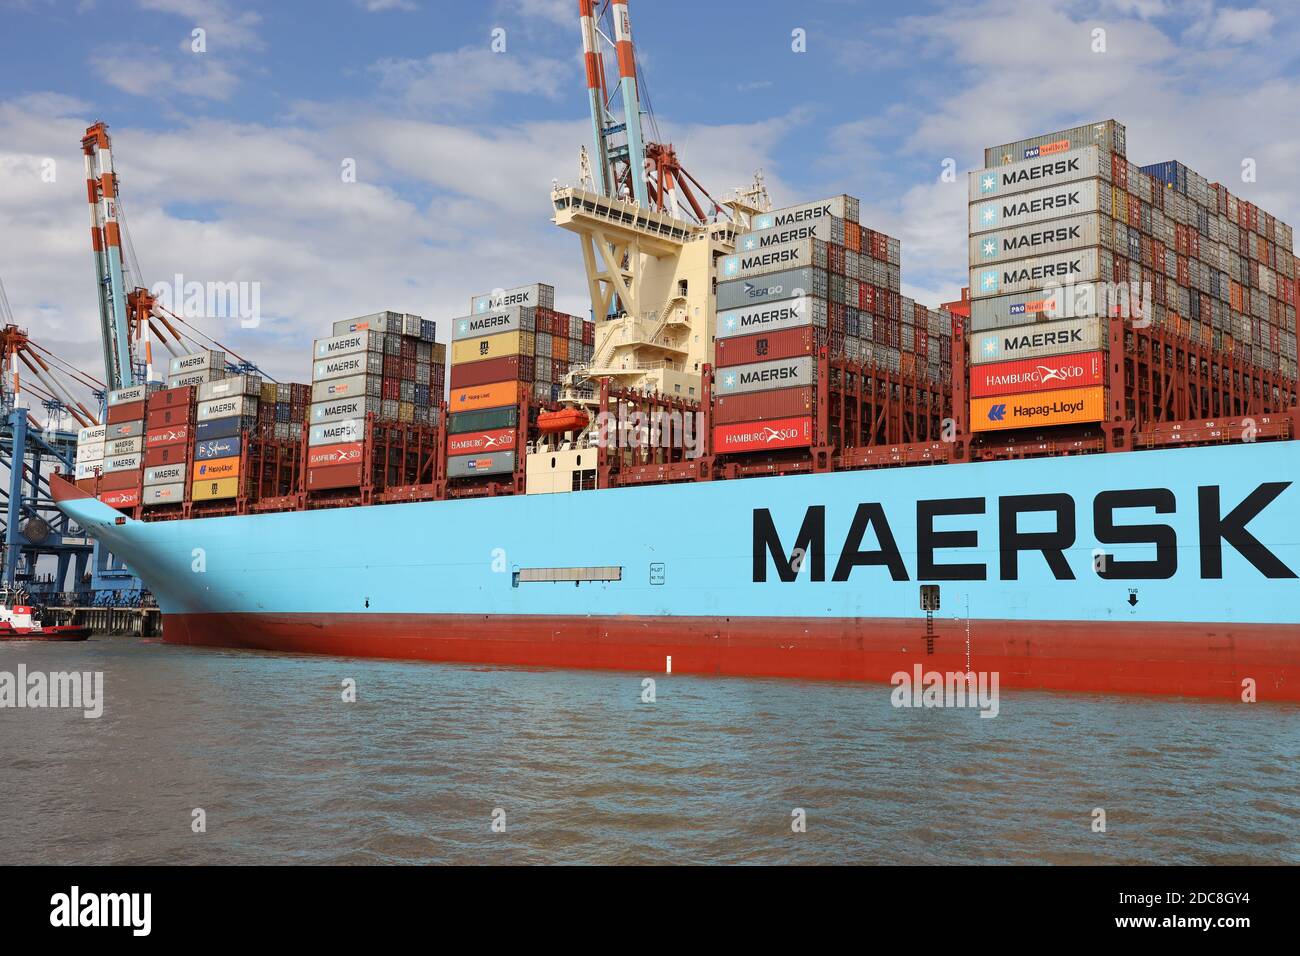 The container ship Mette Maersk will dock in the port of Bremerhaven on August 24, 2020. Stock Photo